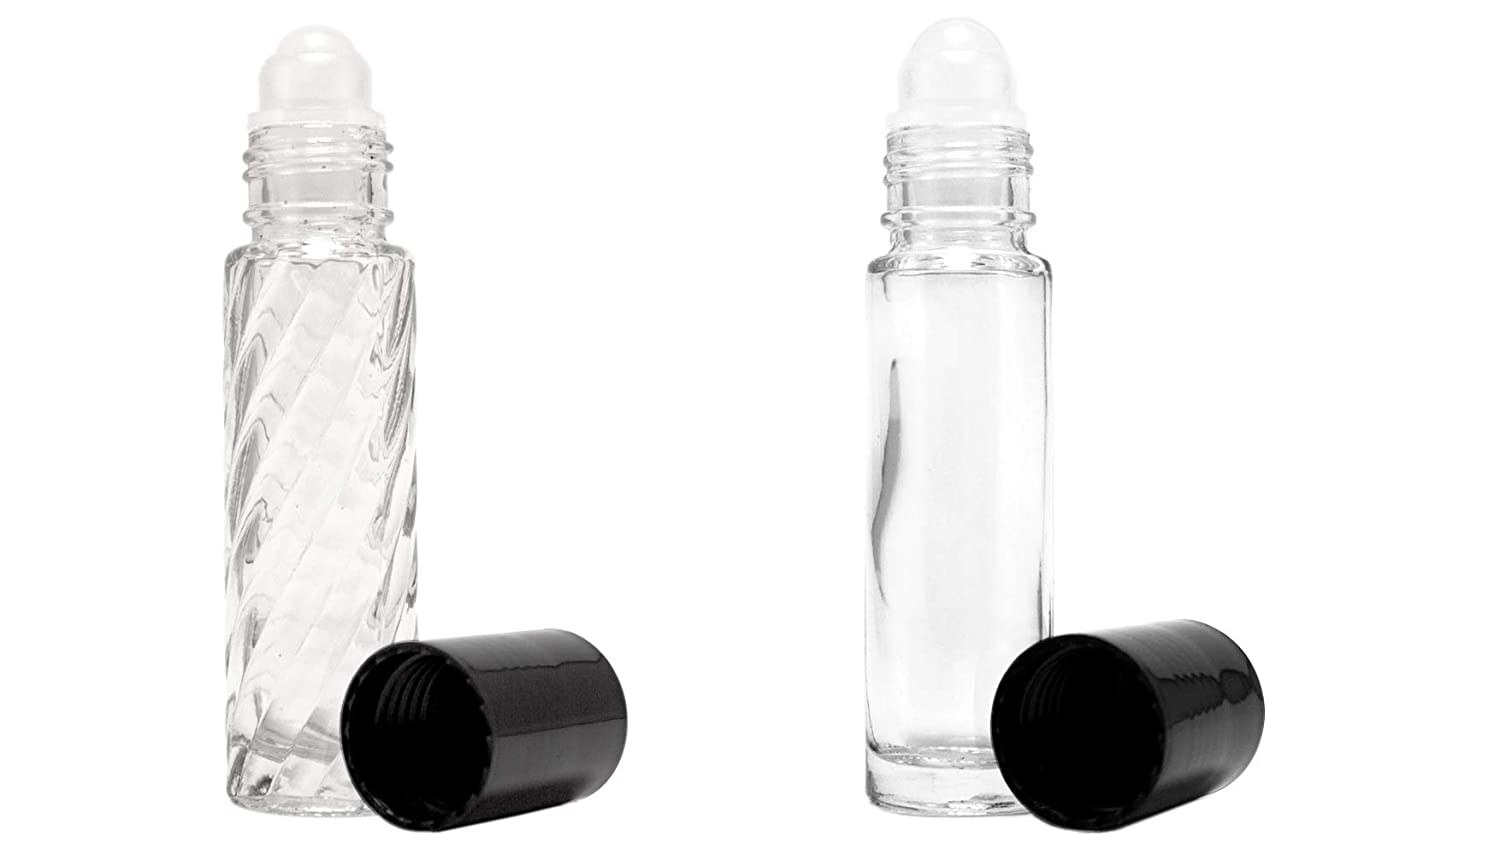 The two bottles in clear glass: one plain and one with twisted design to tell them apart